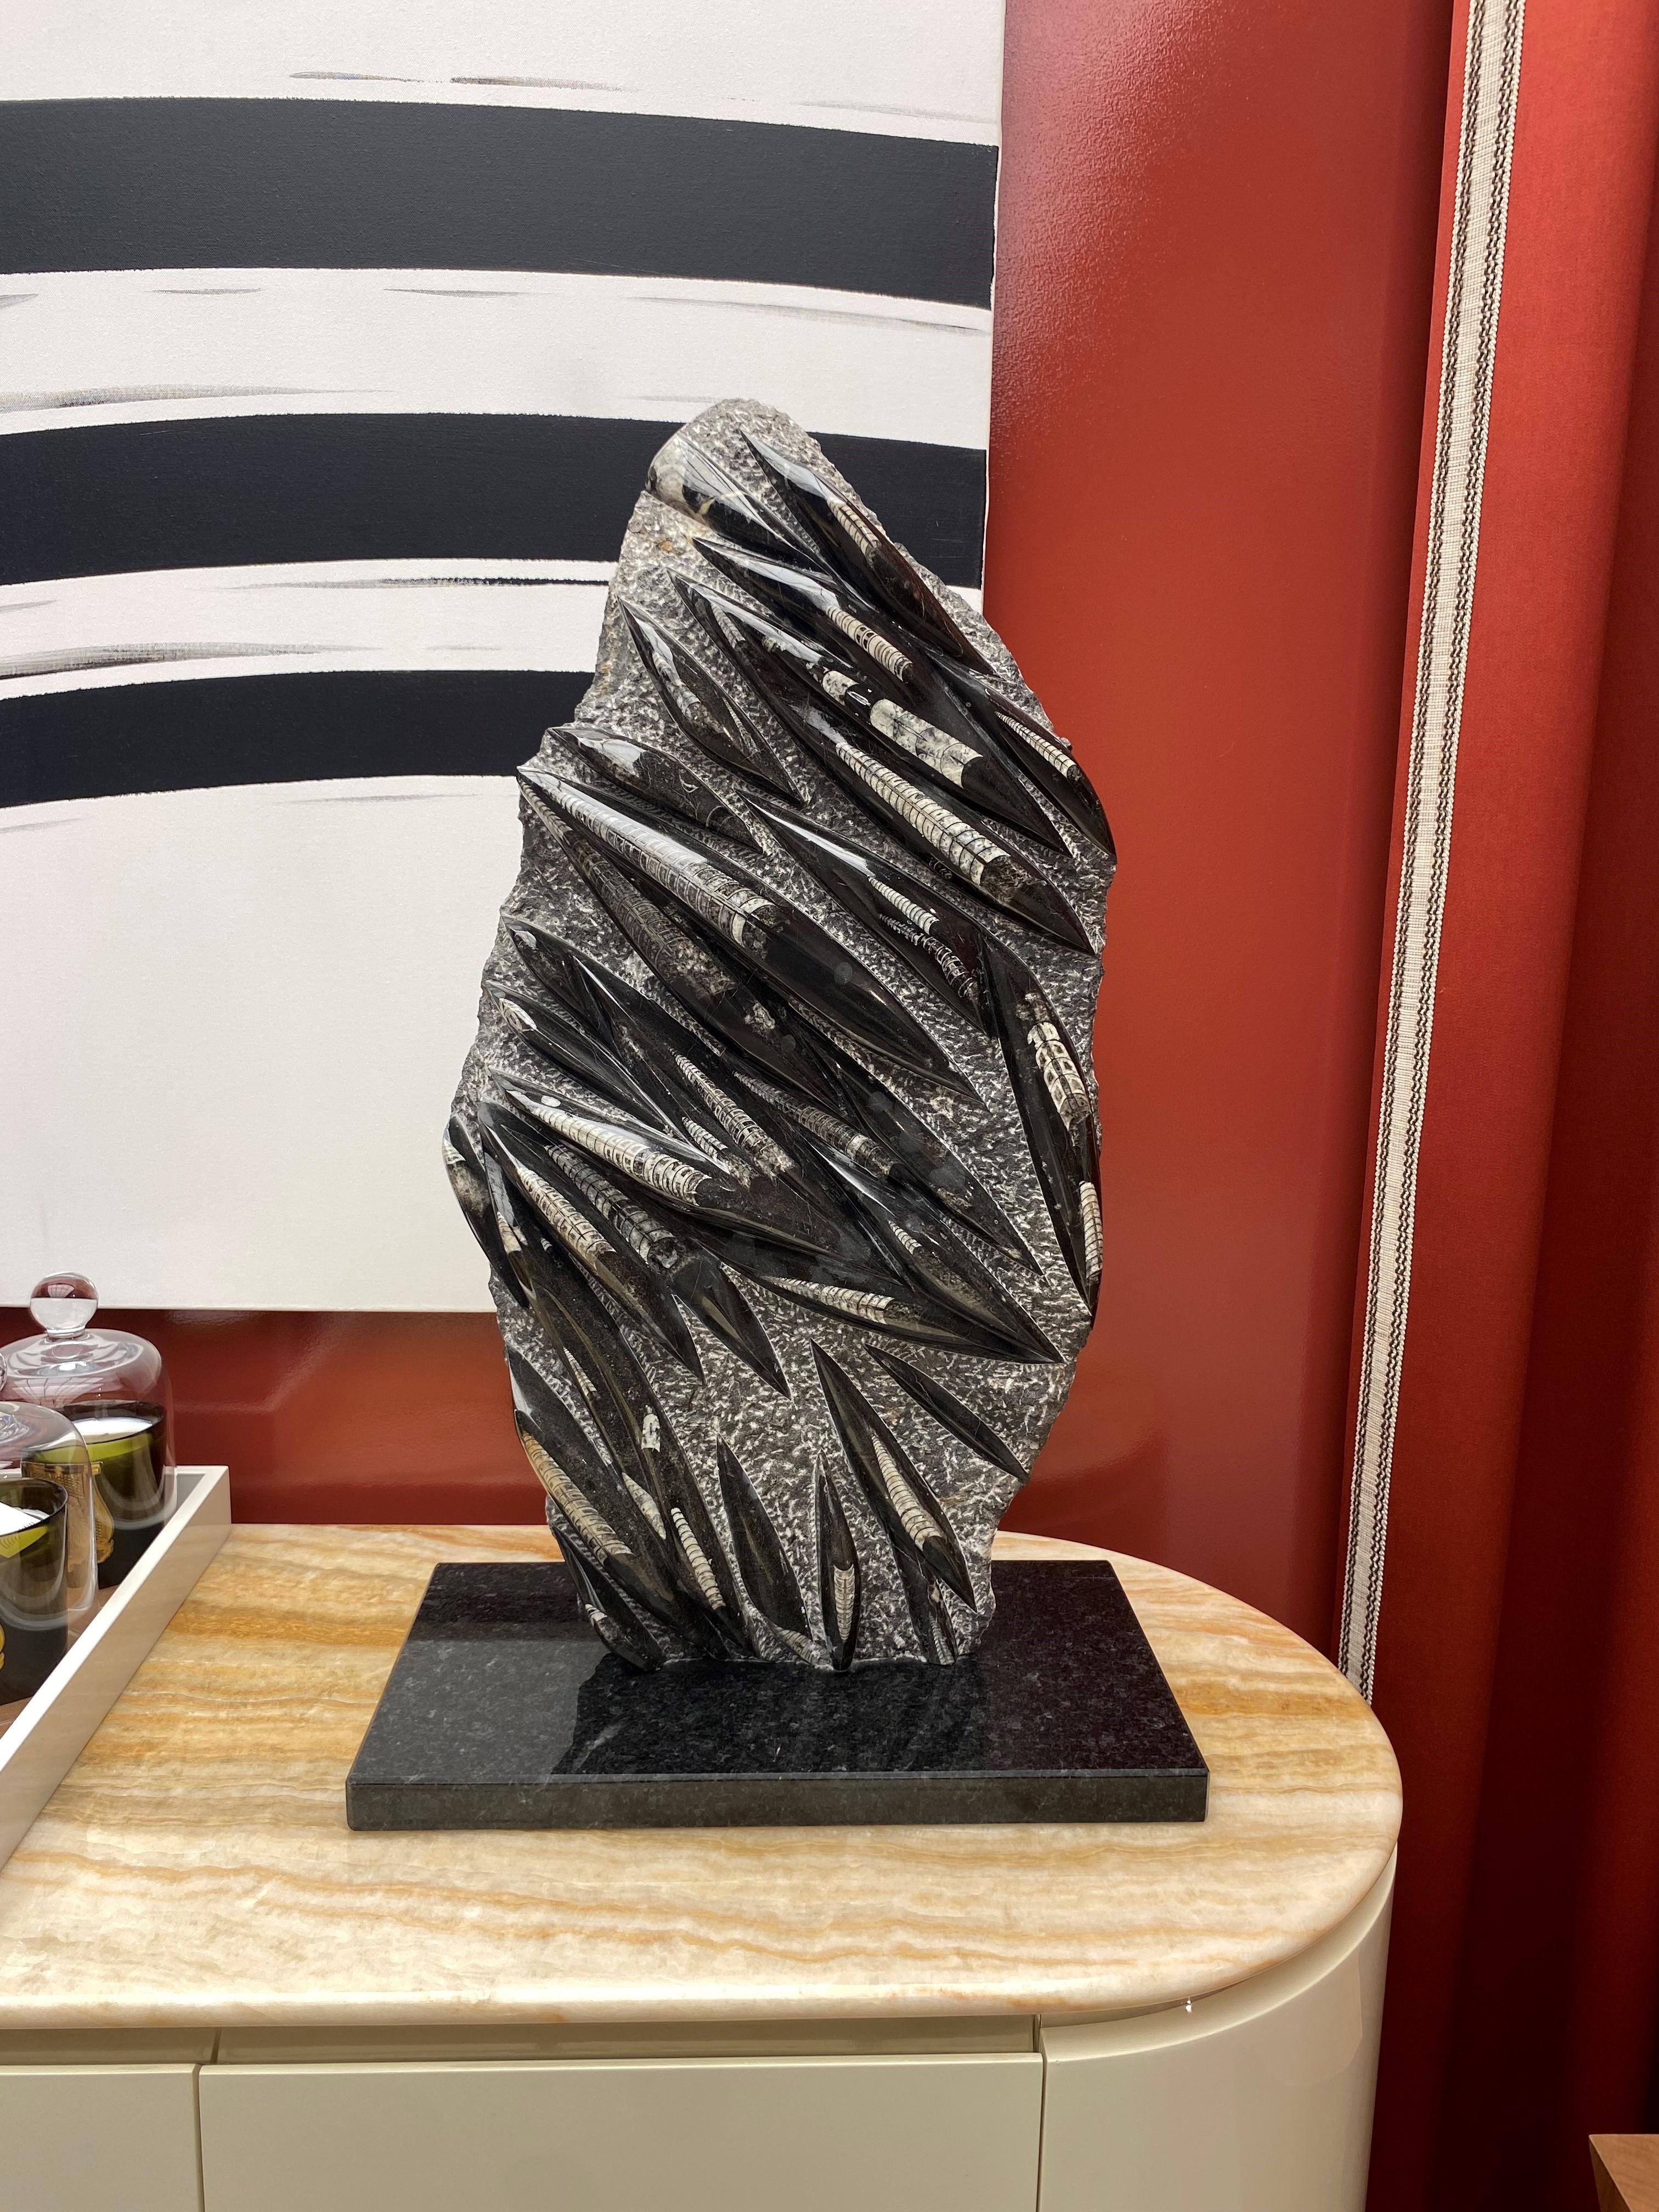 Superb slab filled with wonderful naturally occurring ortho-ceras fossils that was once part of the prehistoric ocean floor over 400 million years ago, placed on a polished black granite stand.
